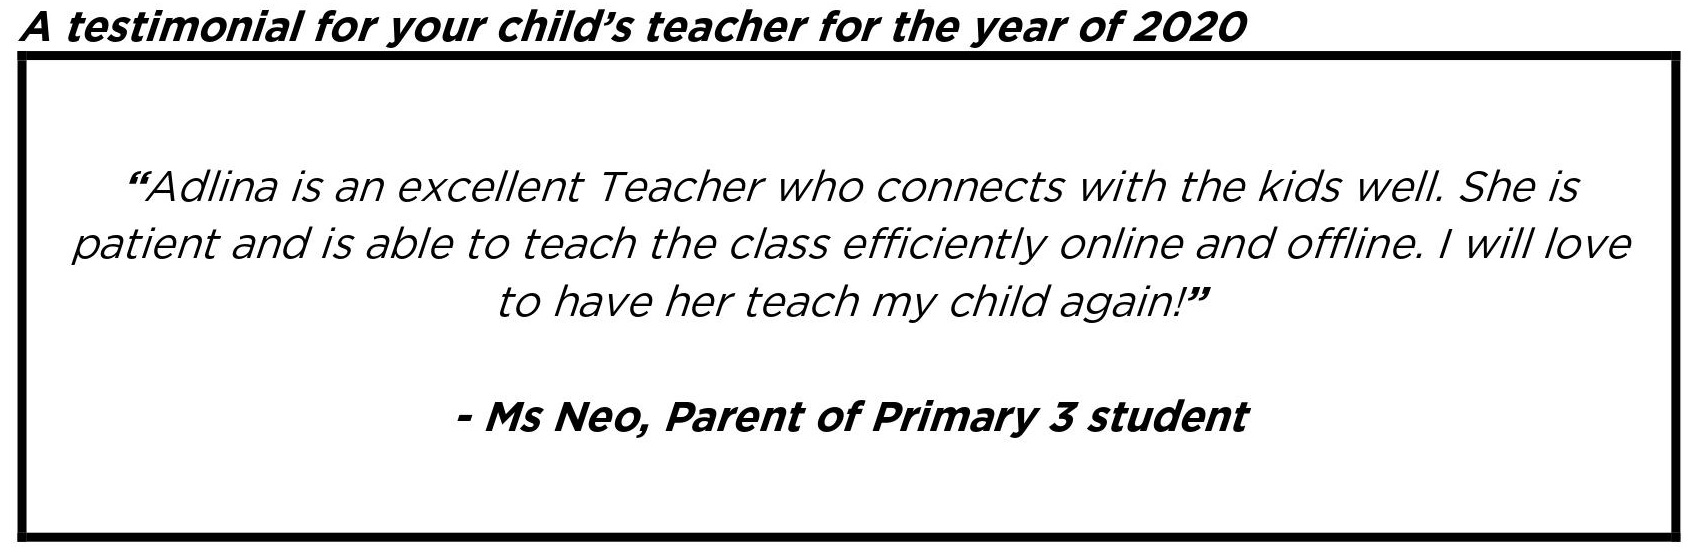 “She is patient and is able to teach the class efficiently online and offline.”